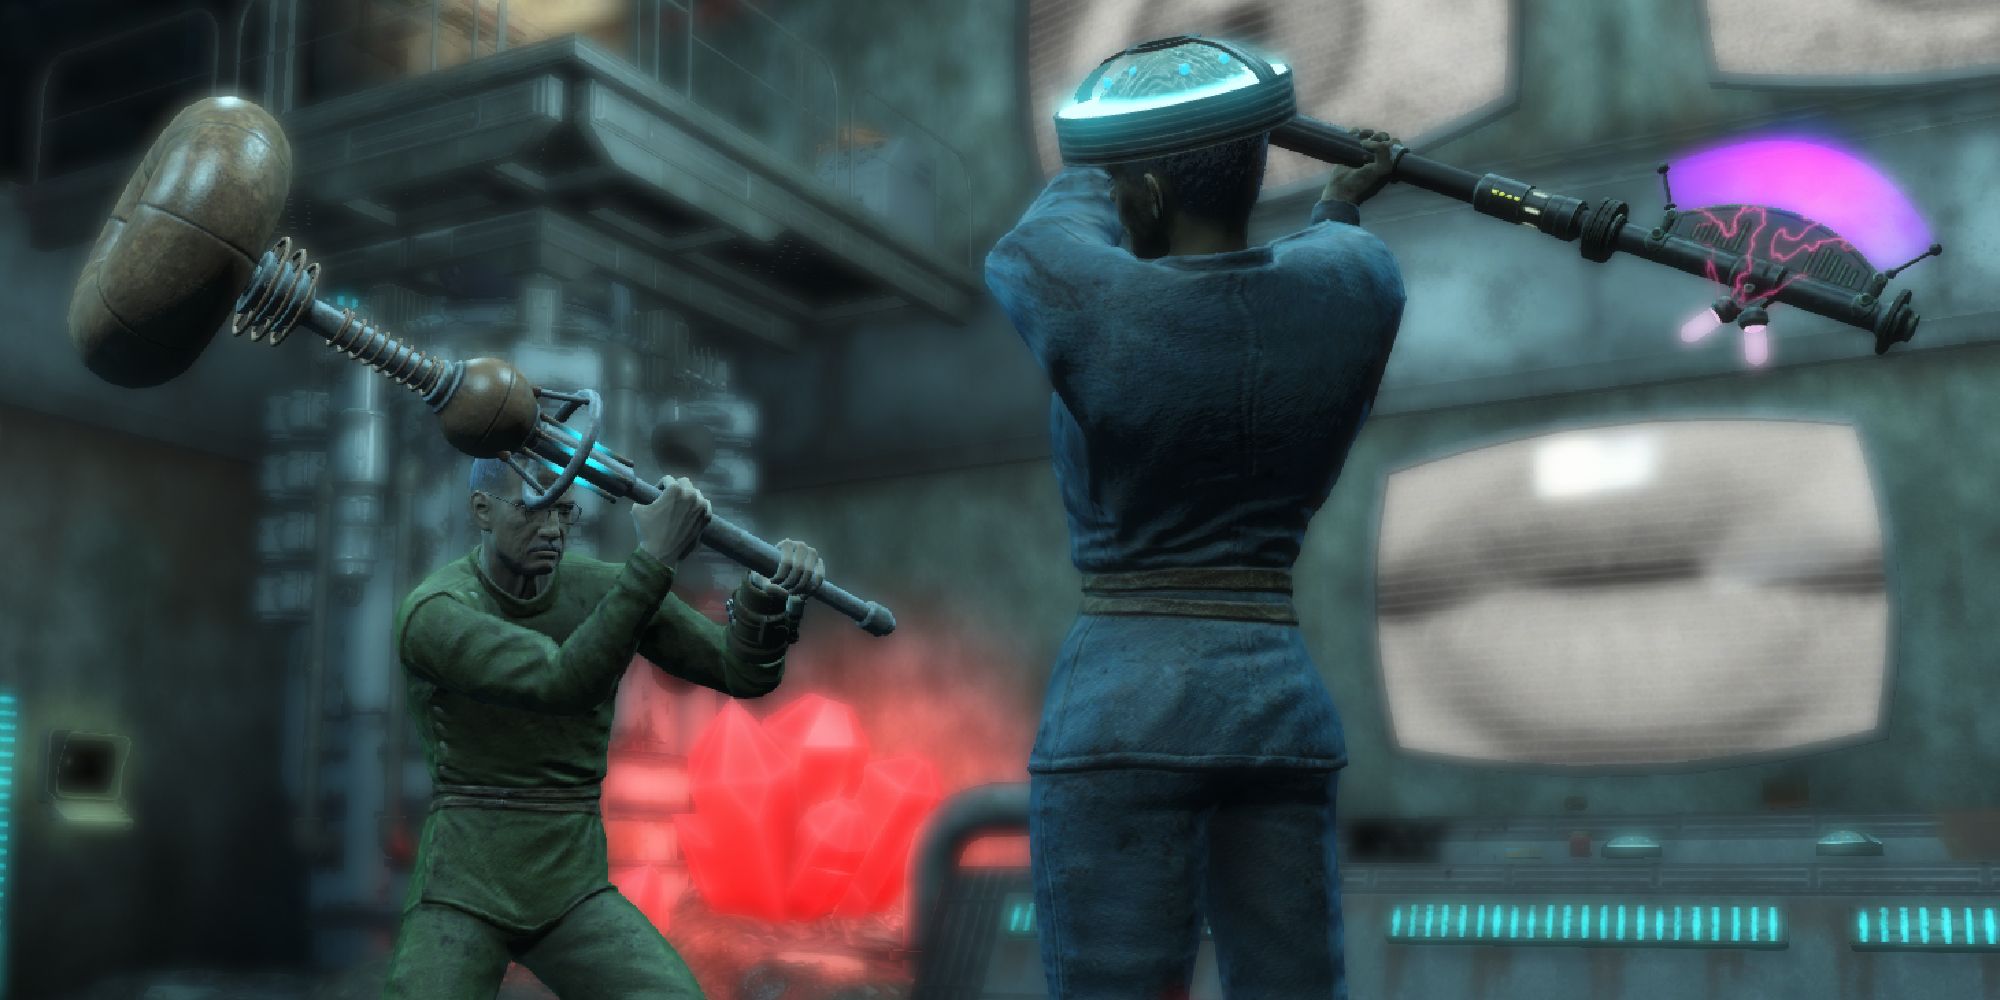 Fallout 4 two people in jumpsuits swinging at each other with futuristic clubs